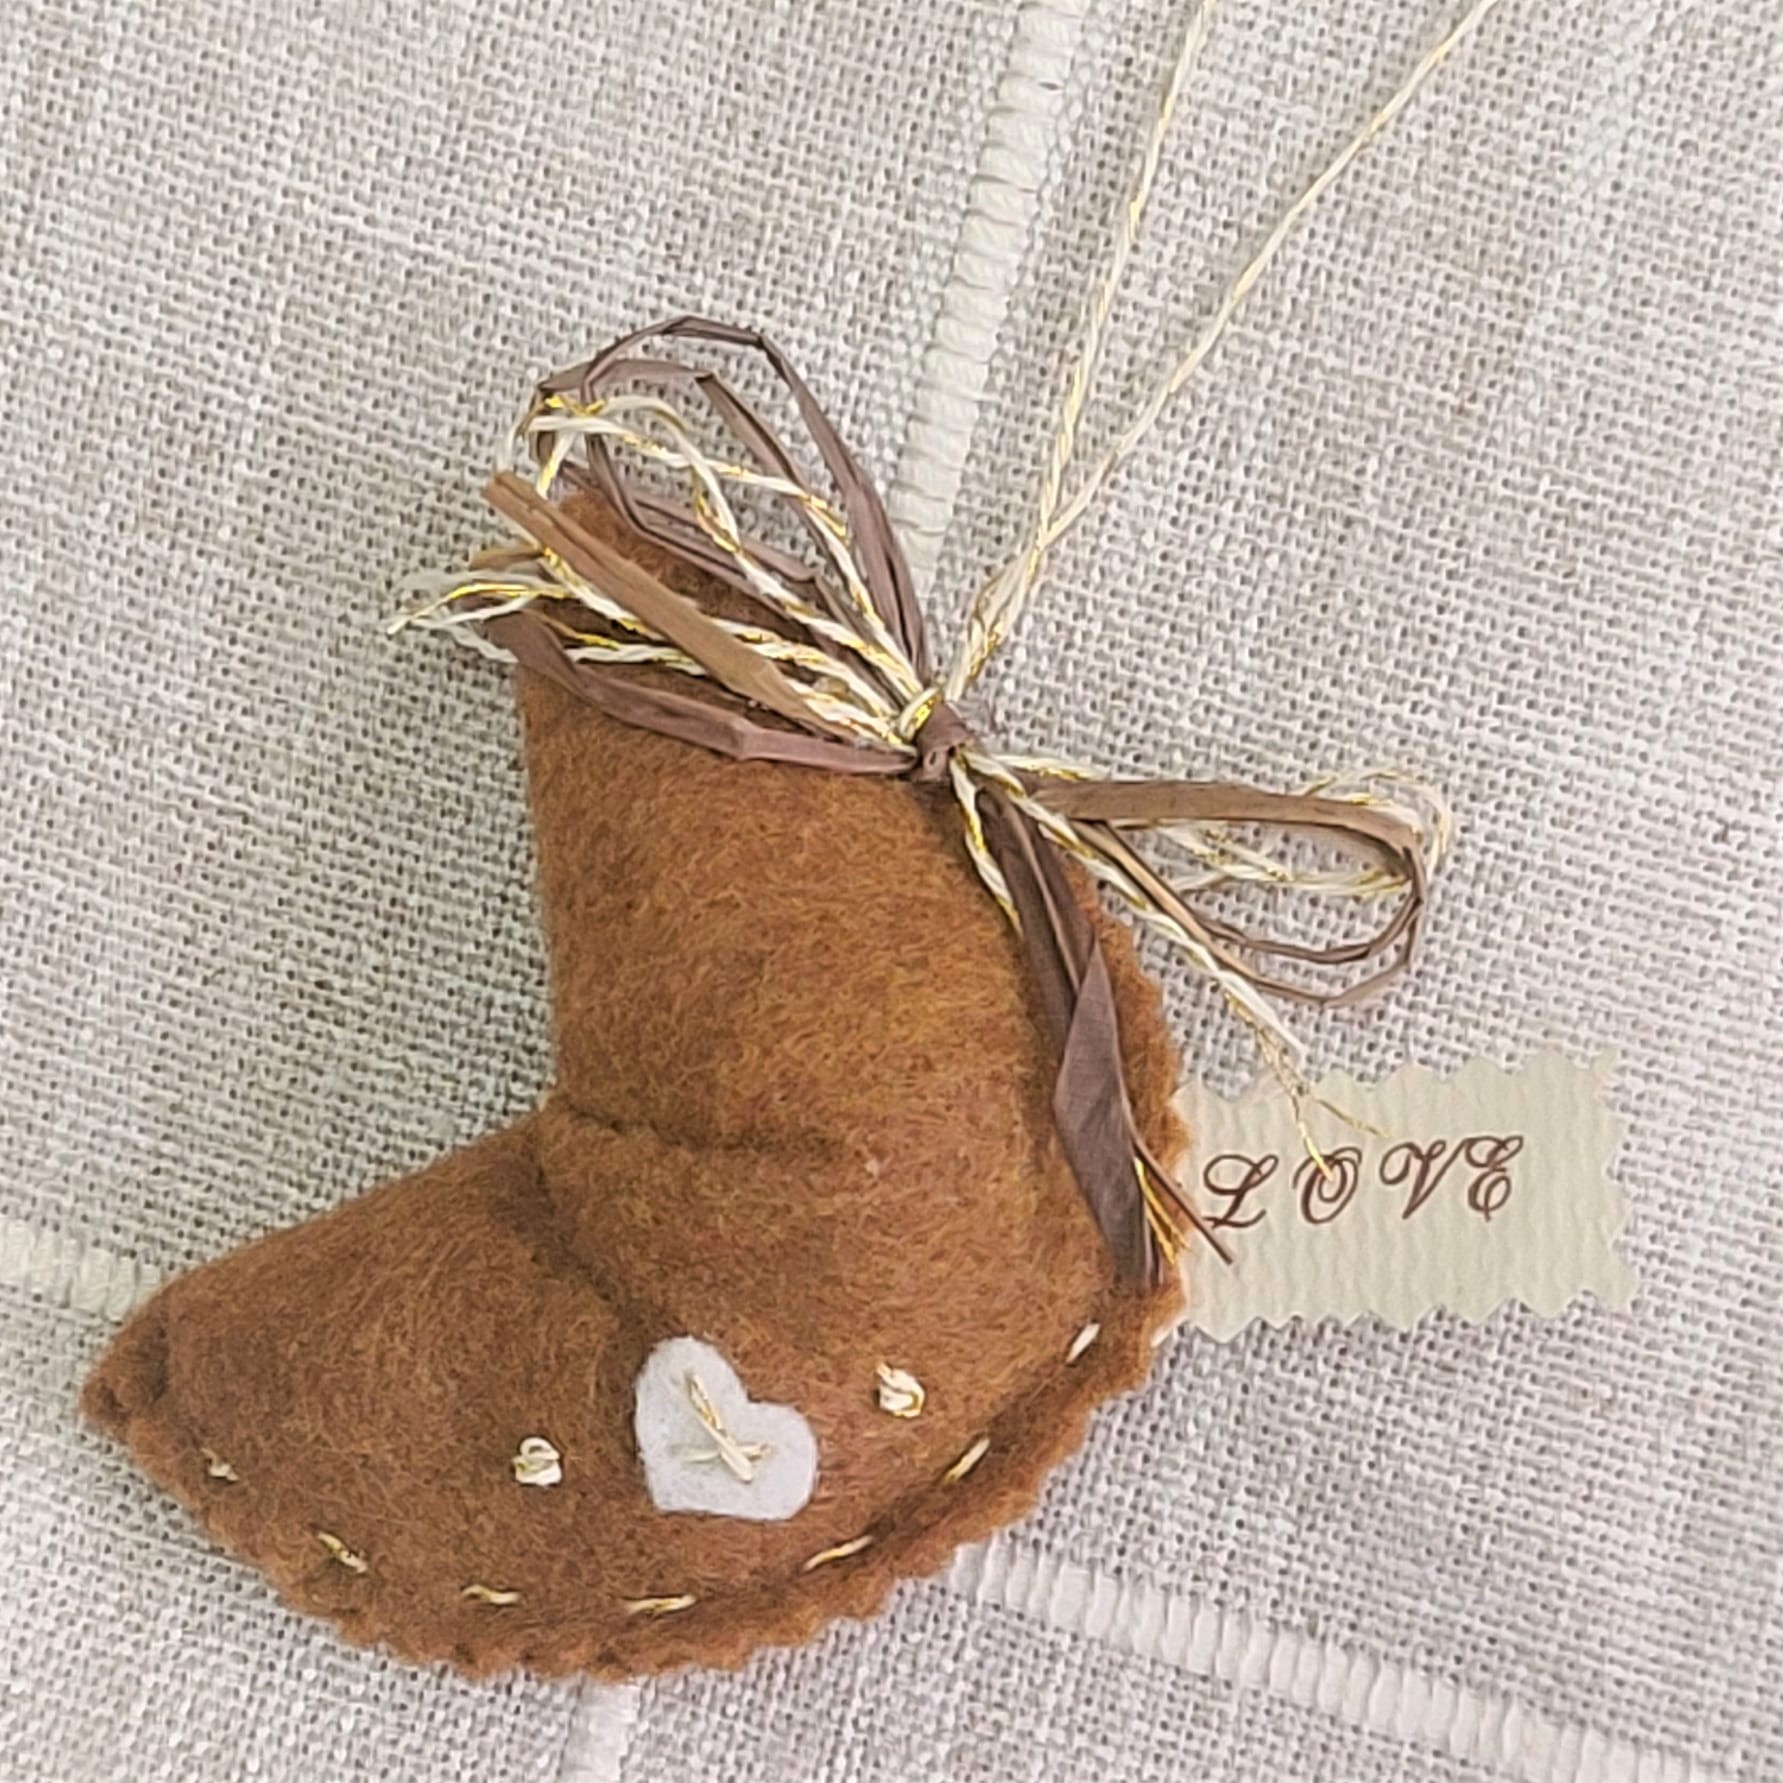 Fortune cookie felt ornament small LOVE tag